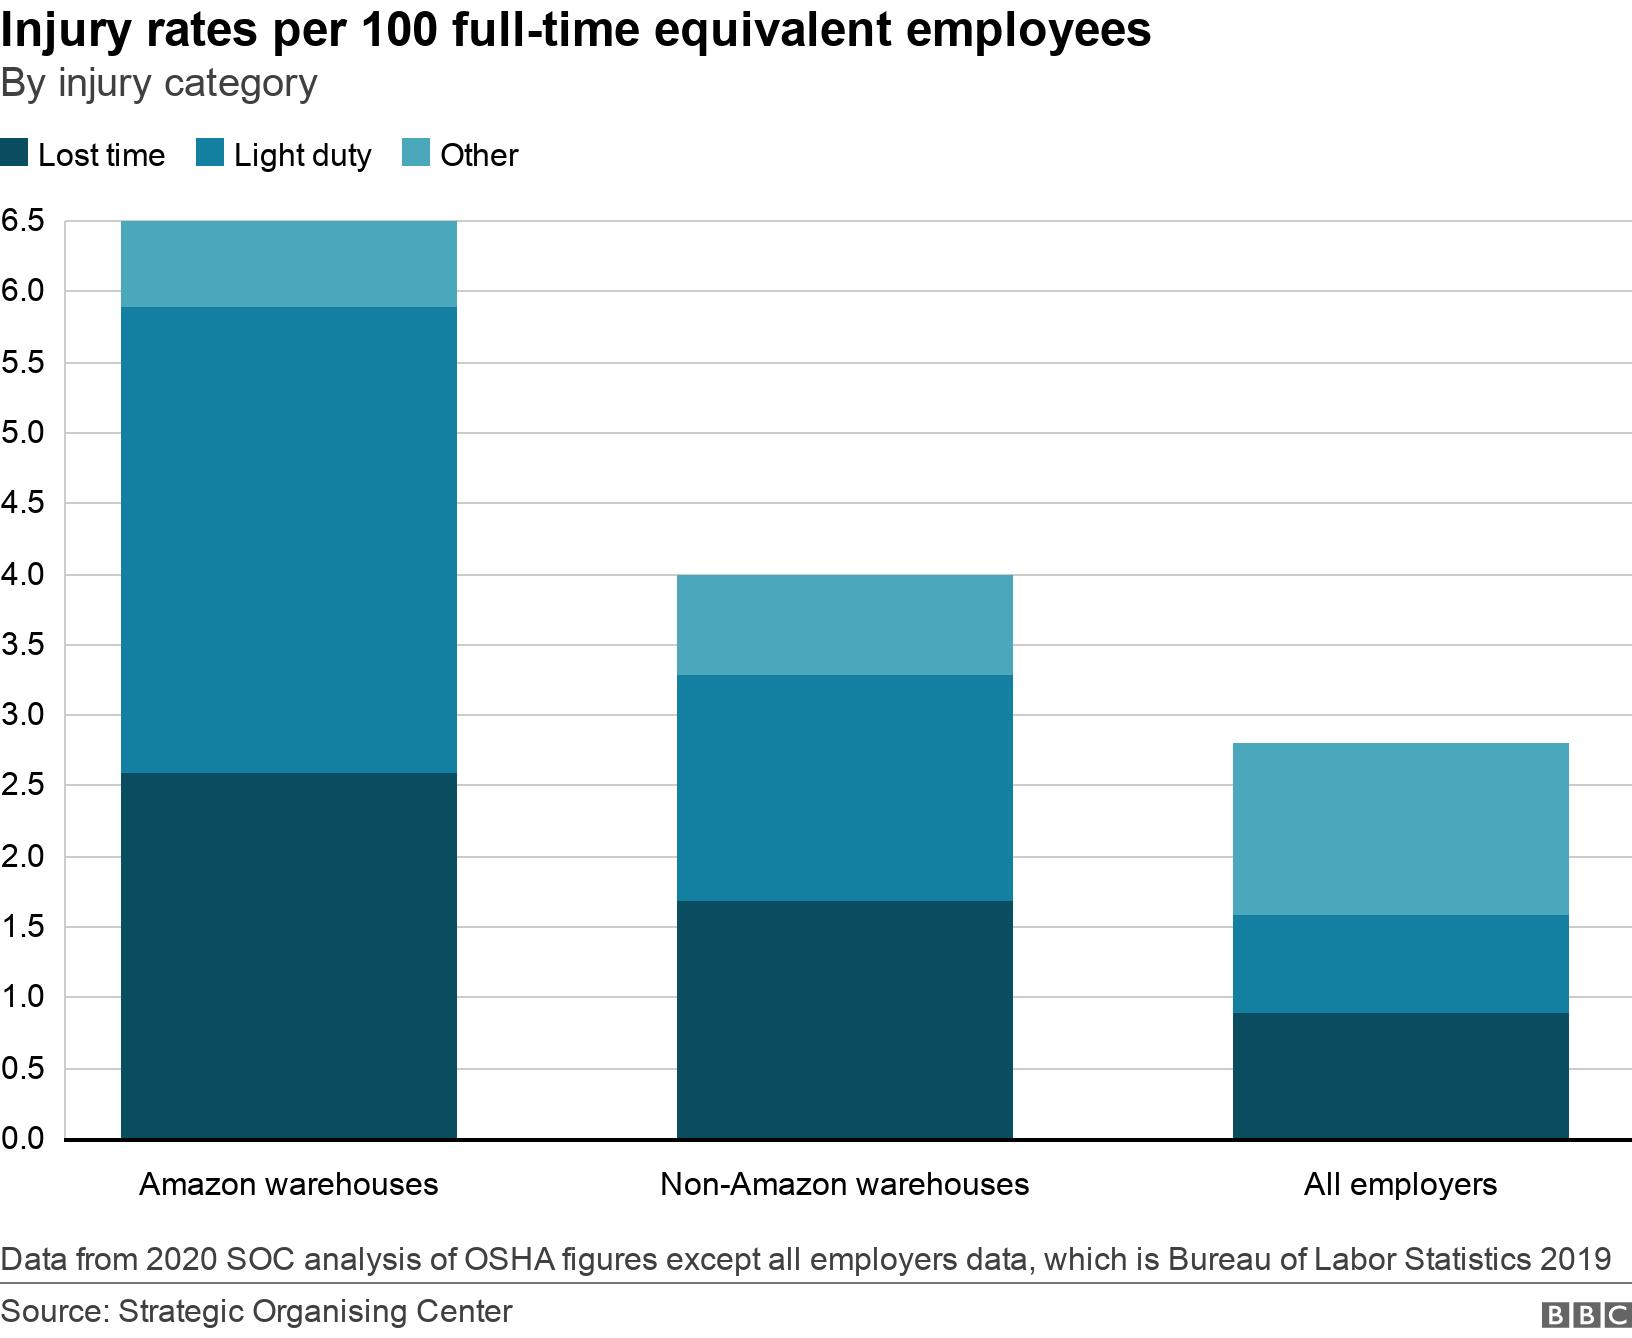 Injury rates per 100 full-time equivalent employees. By injury category. Three charts show the number of injures per 100 FTEs for Amazon warehouses (6.5), non-Amazon warehouses (4.0), and all employers (3.5). Data from 2020 SOC analysis of OSHA figures except all employers data, which is Bureau of Labor Statistics 2019.